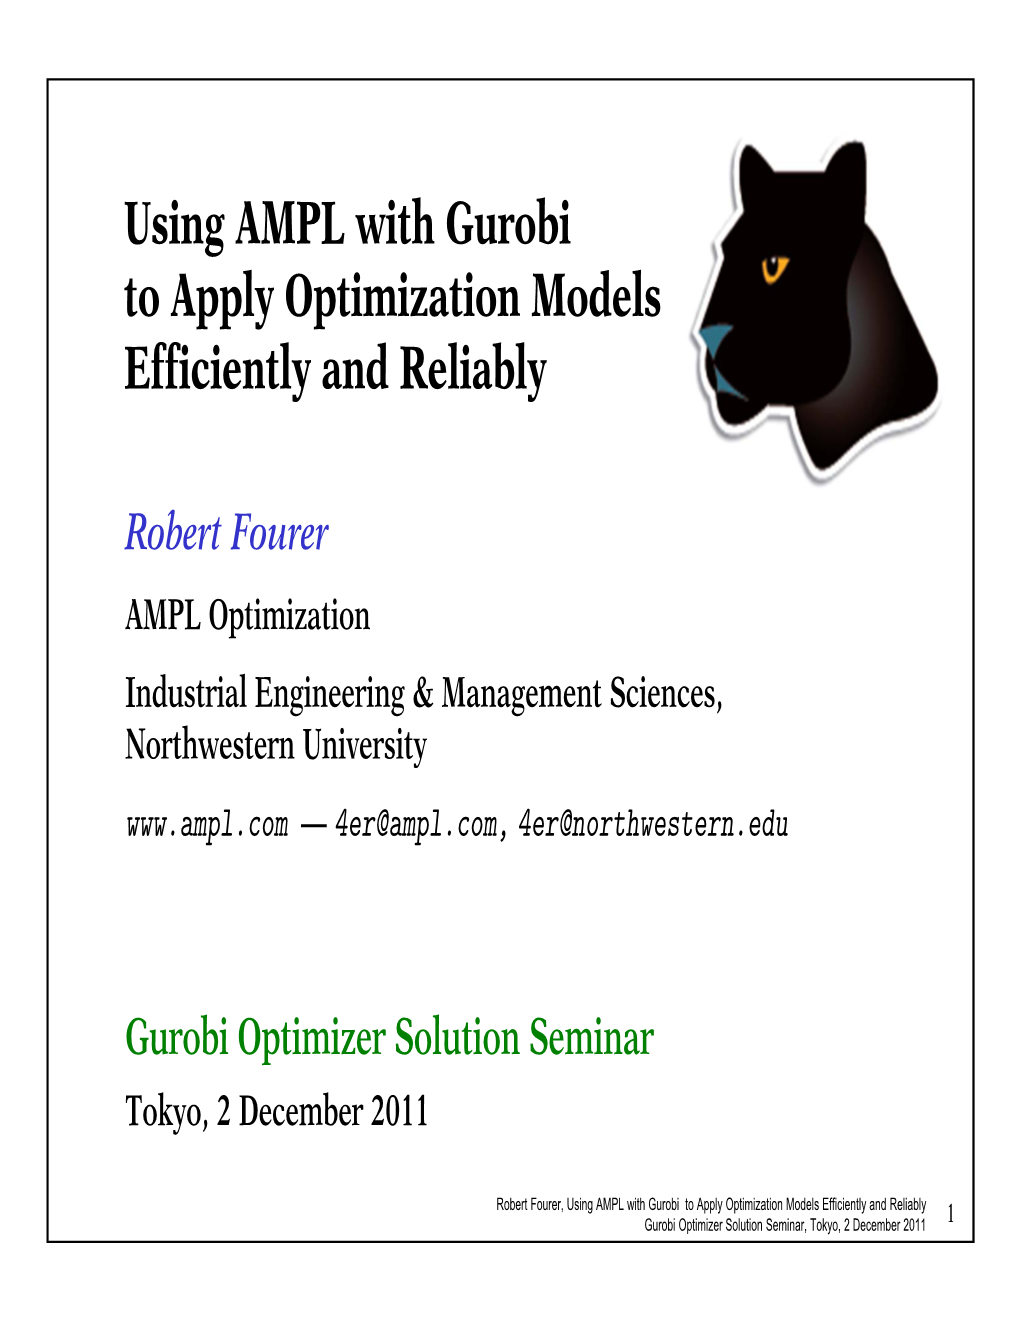 Using AMPL with Gurobi to Apply Optimization Models Efficiently and Reliably